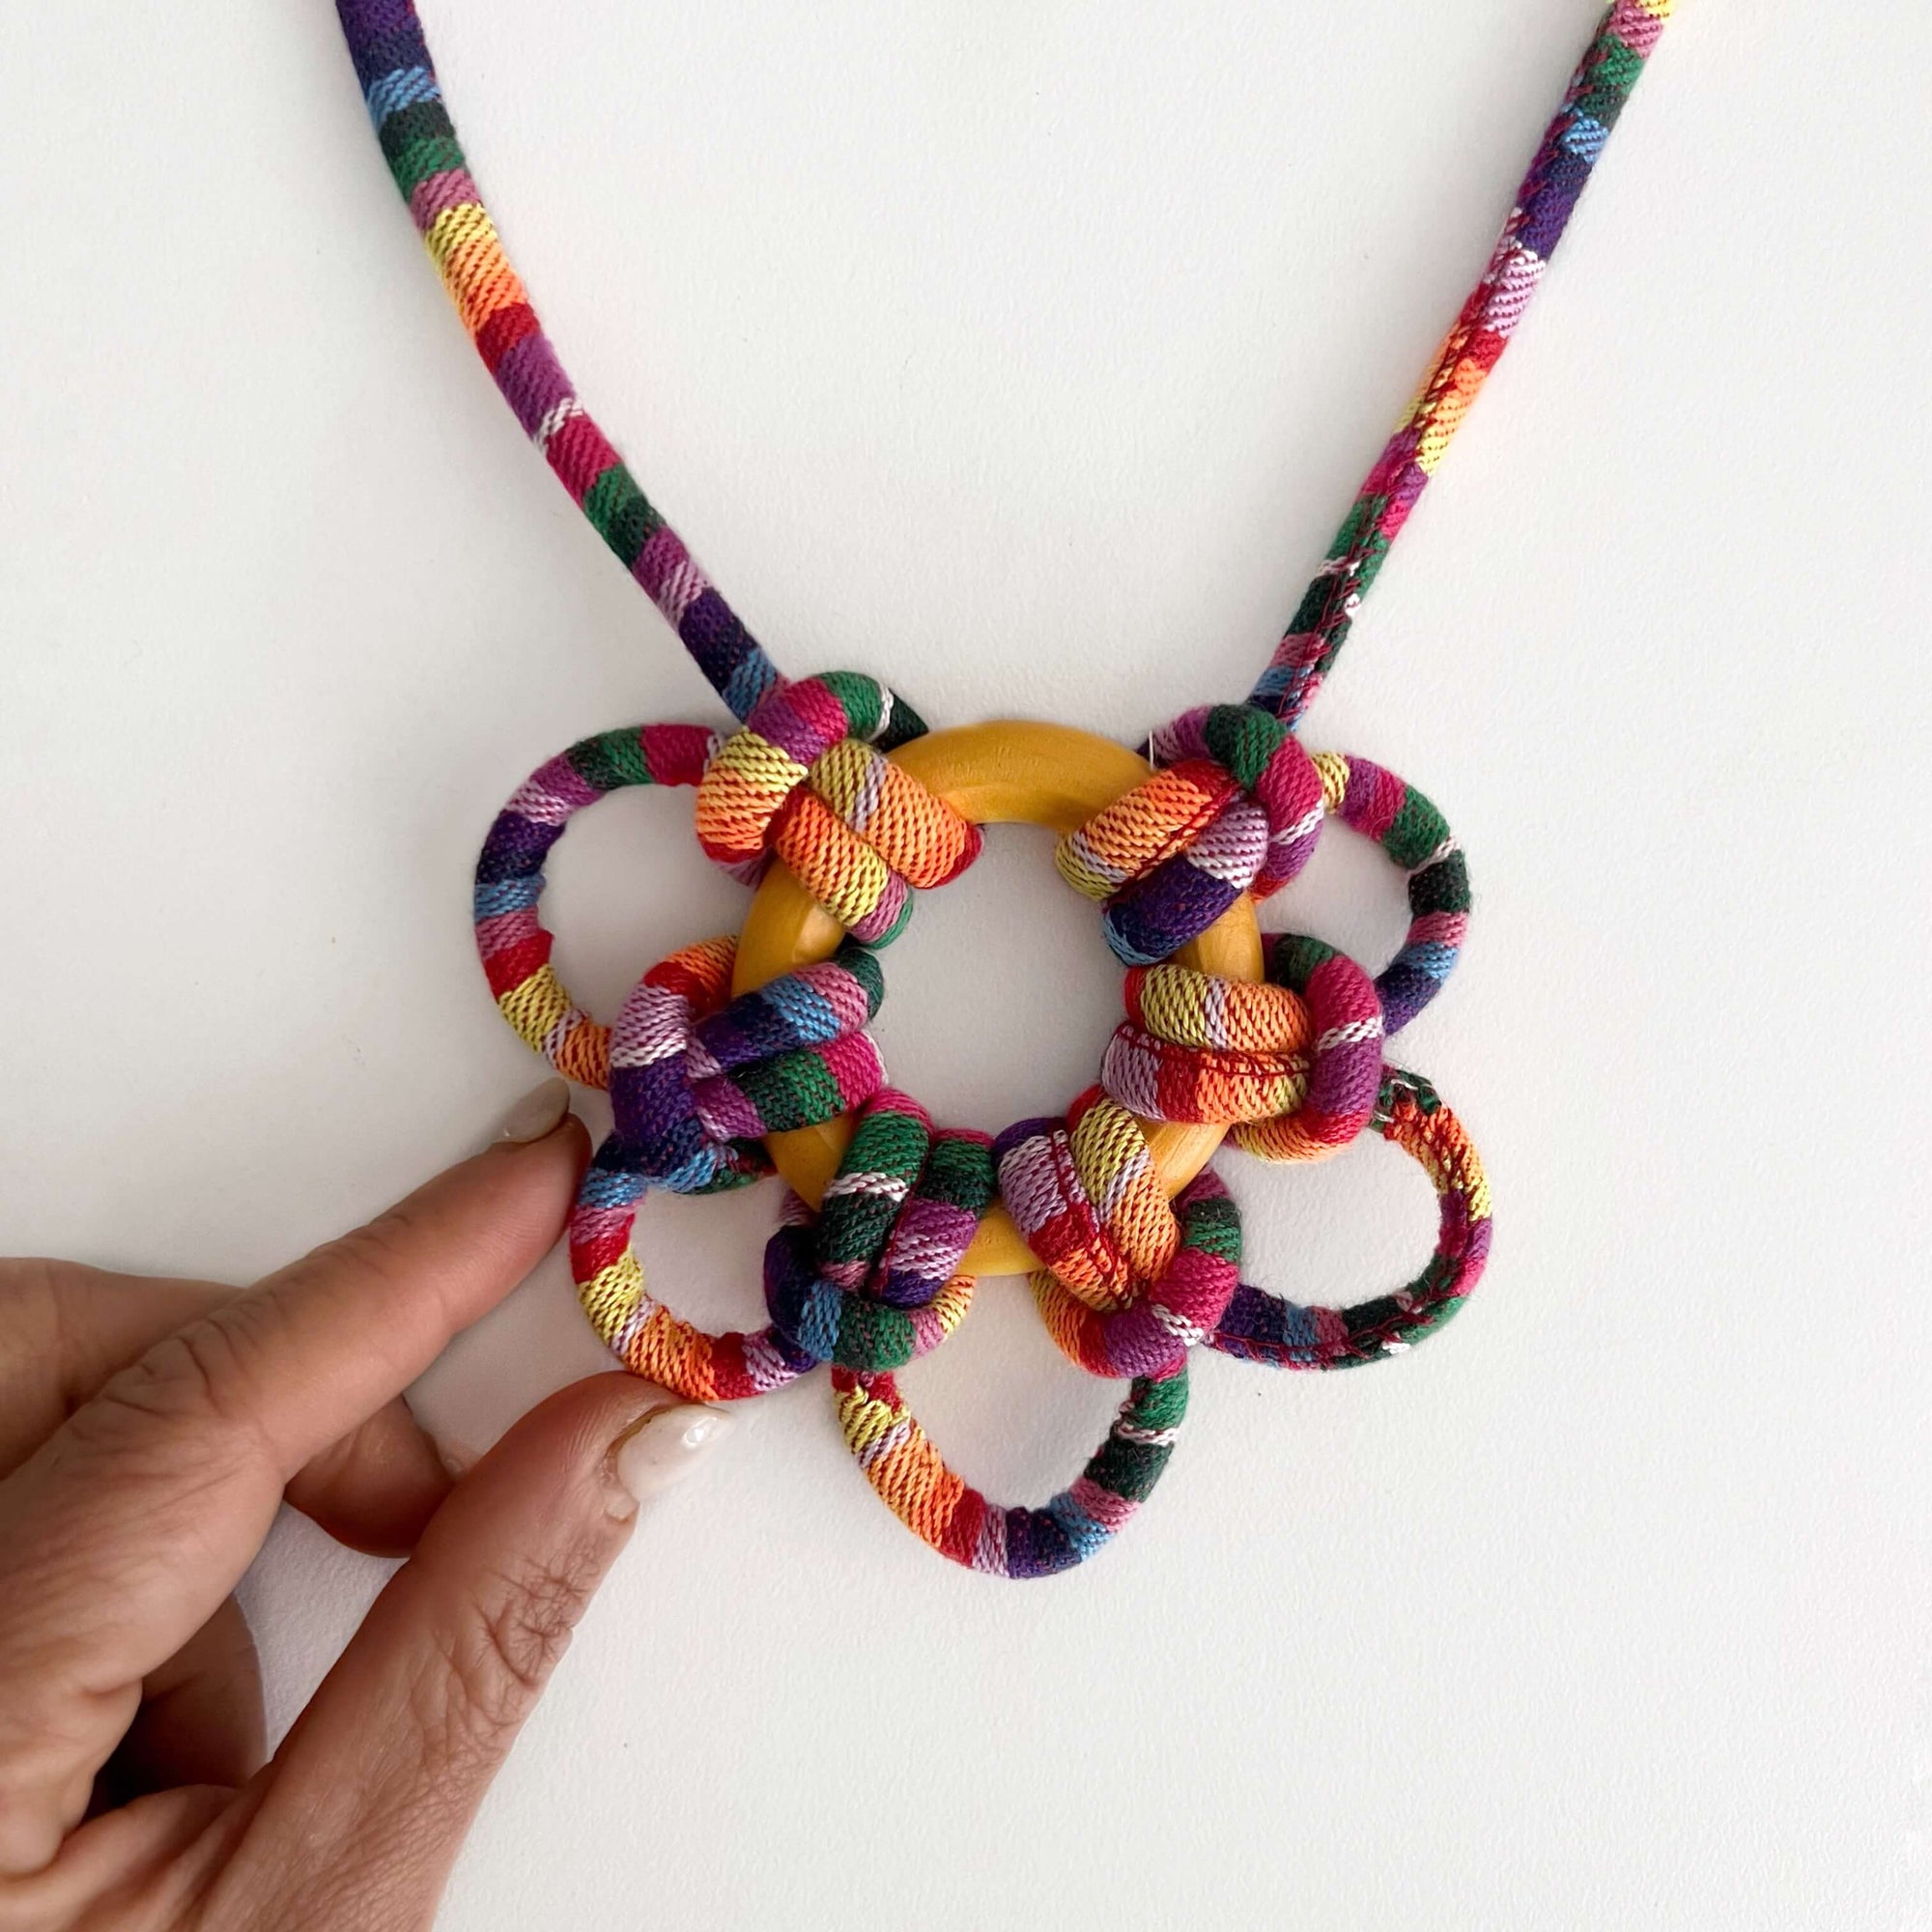 woven cord made into fun necklace with macrame pattern